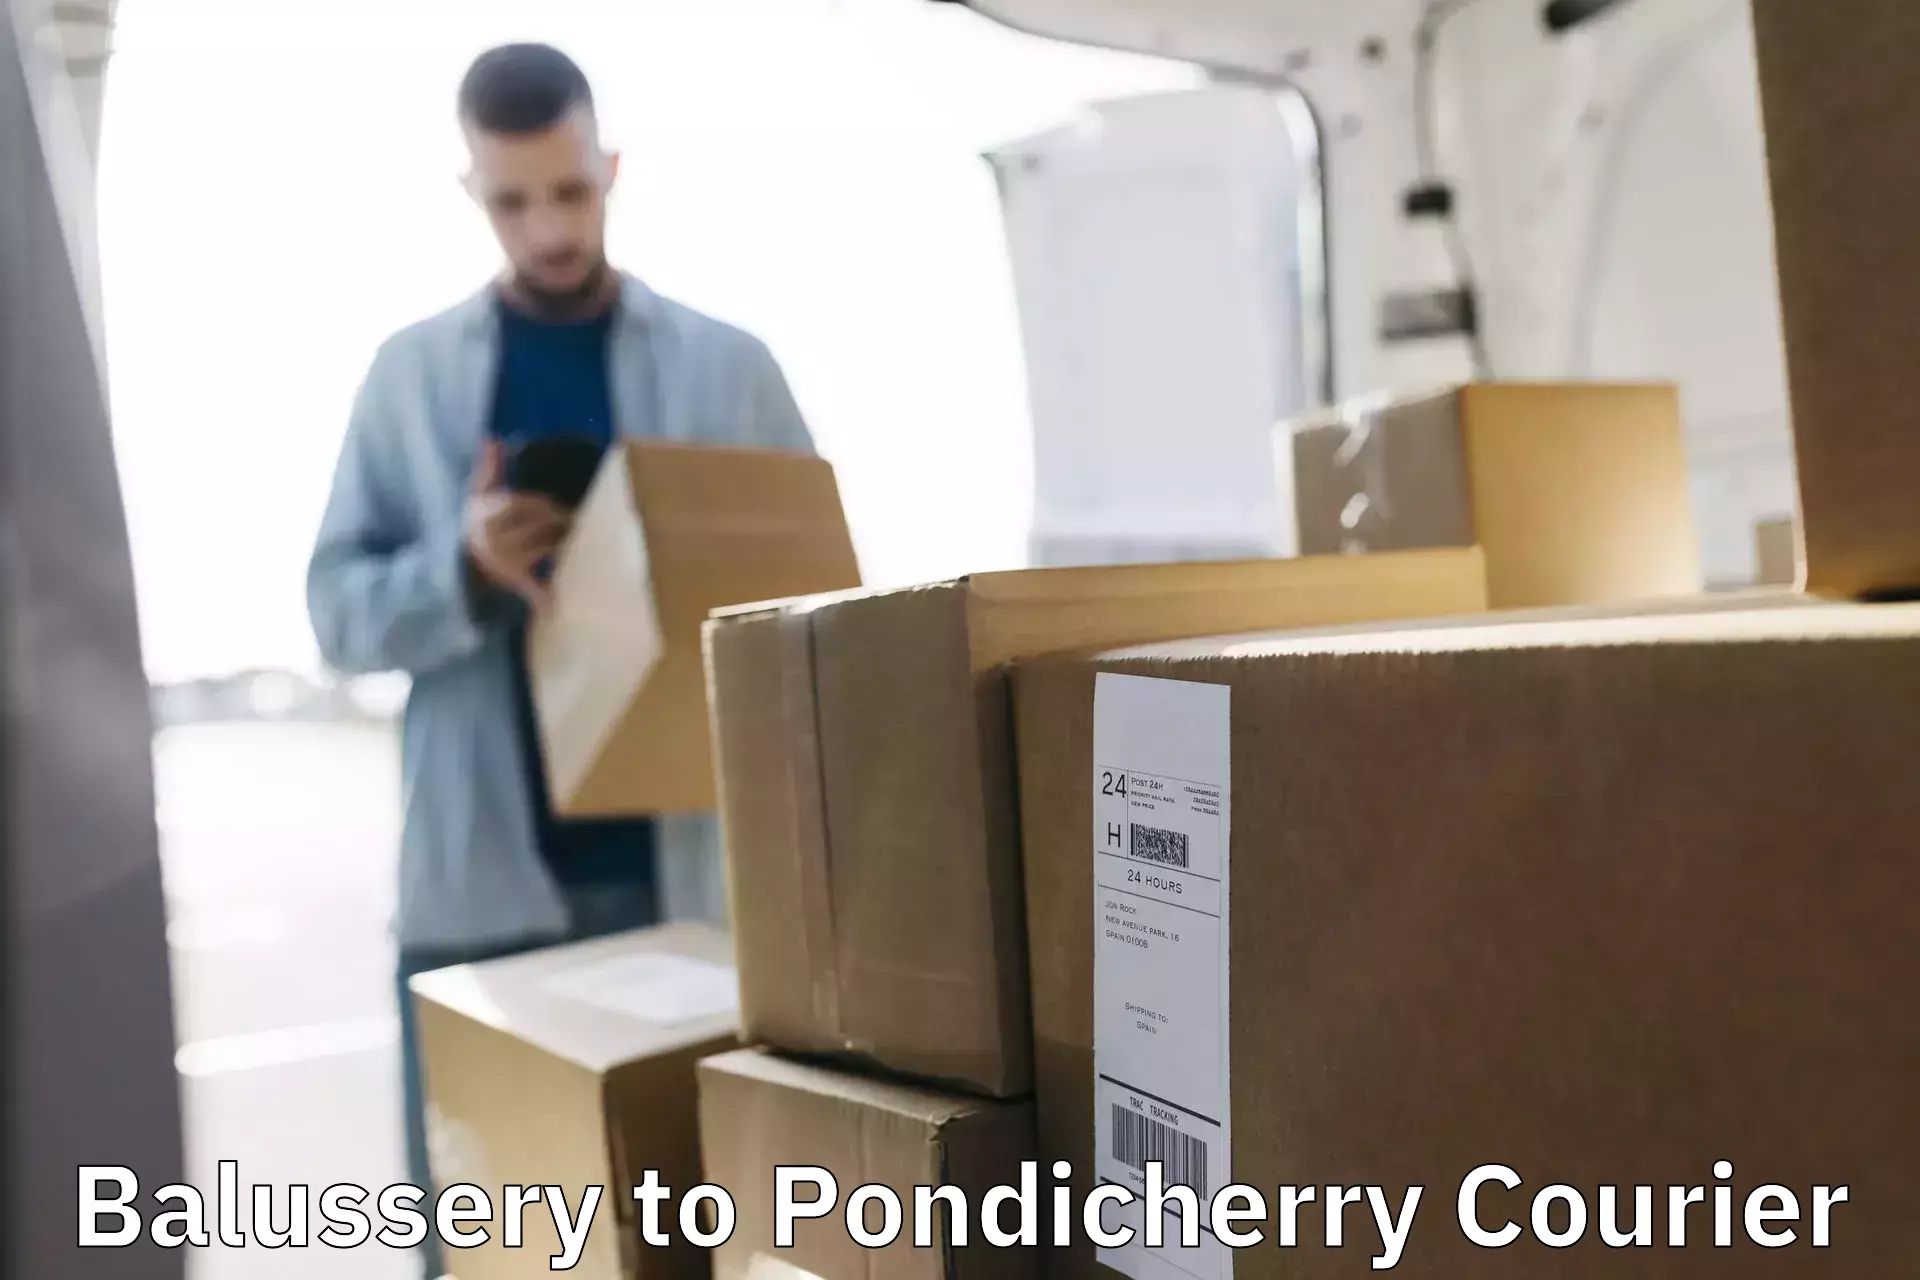 Reliable delivery network Balussery to Pondicherry